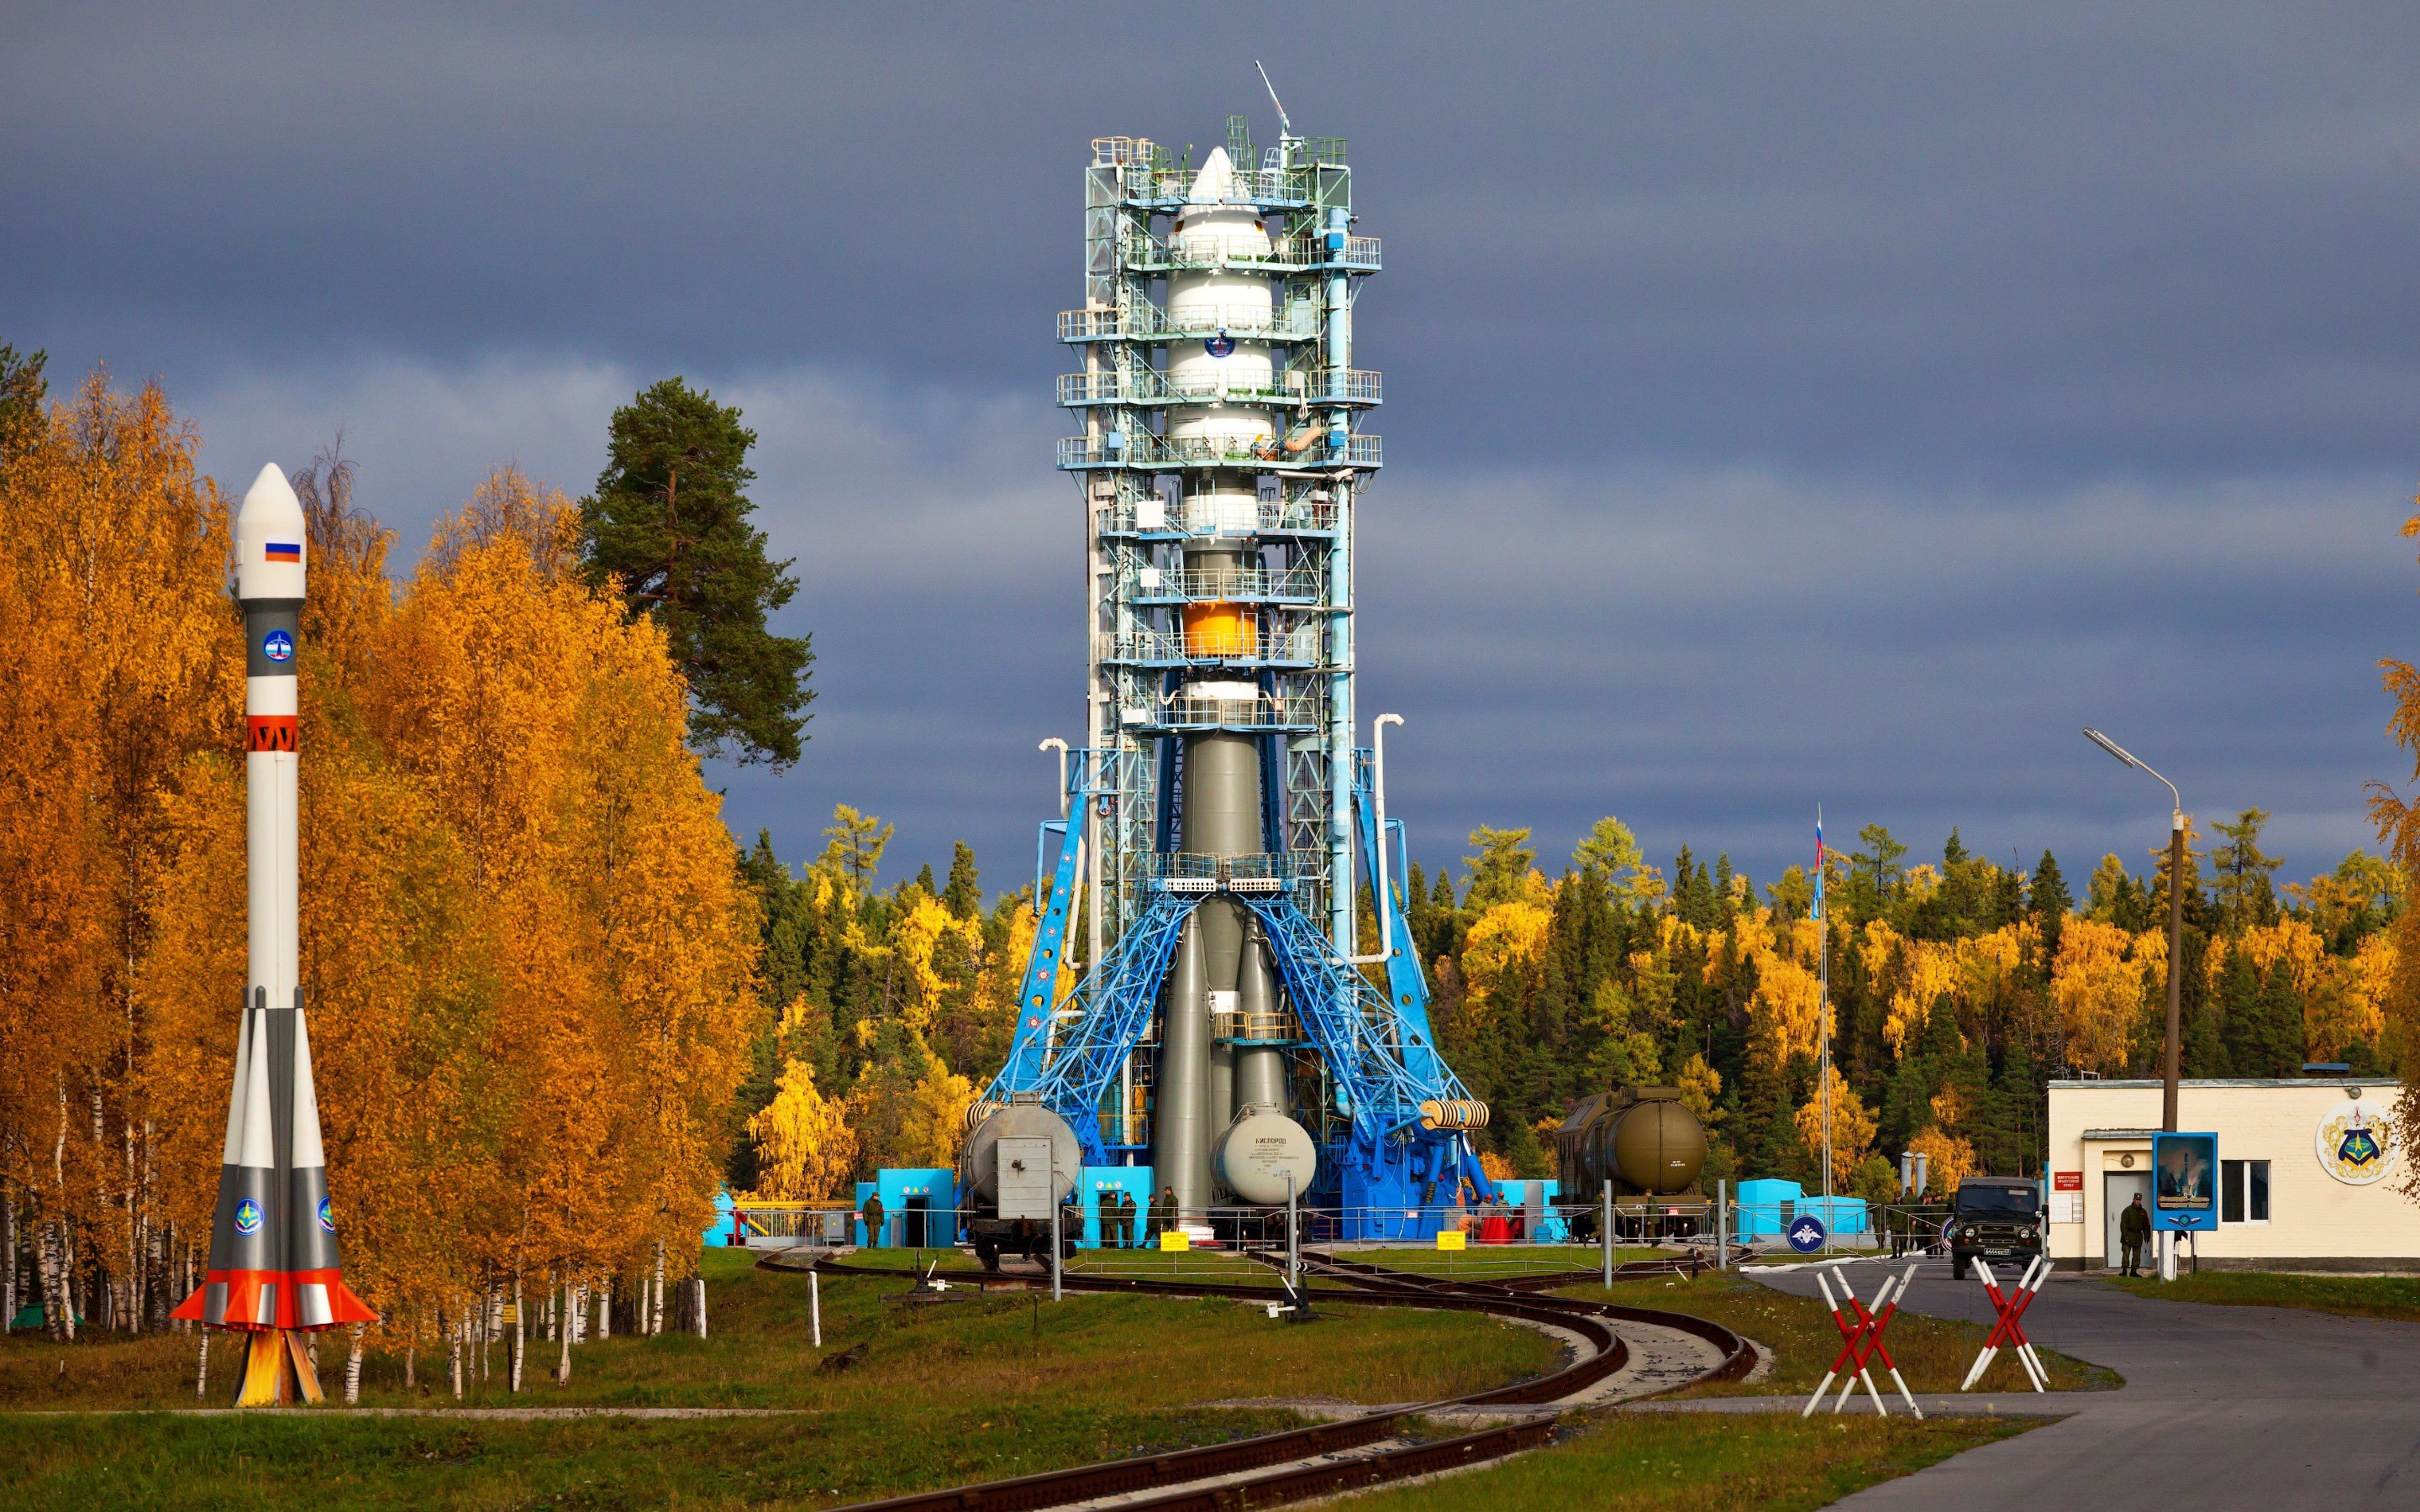 space station, Spaceship, Rockets, Clouds, Russian, Trees, Technology, Soldier Wallpaper